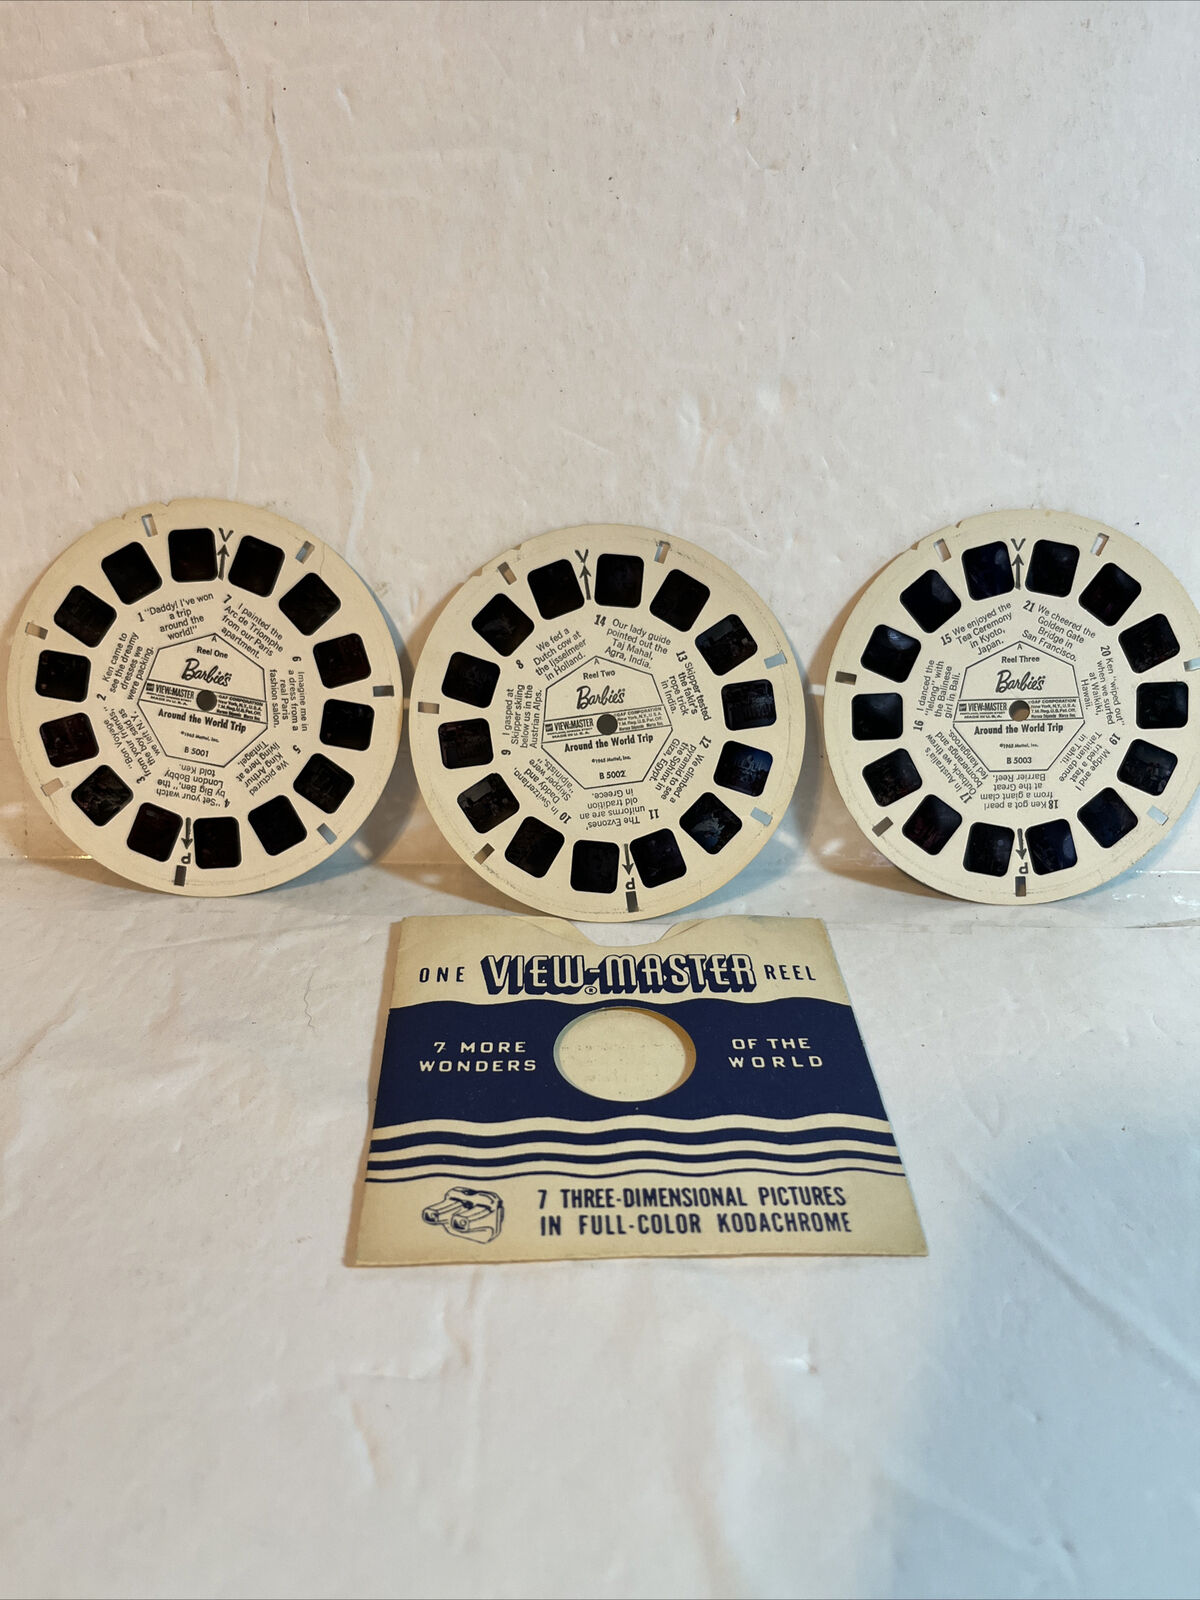 Barbie Around the World Trip 1965 lot of 3 Viewmaster reels